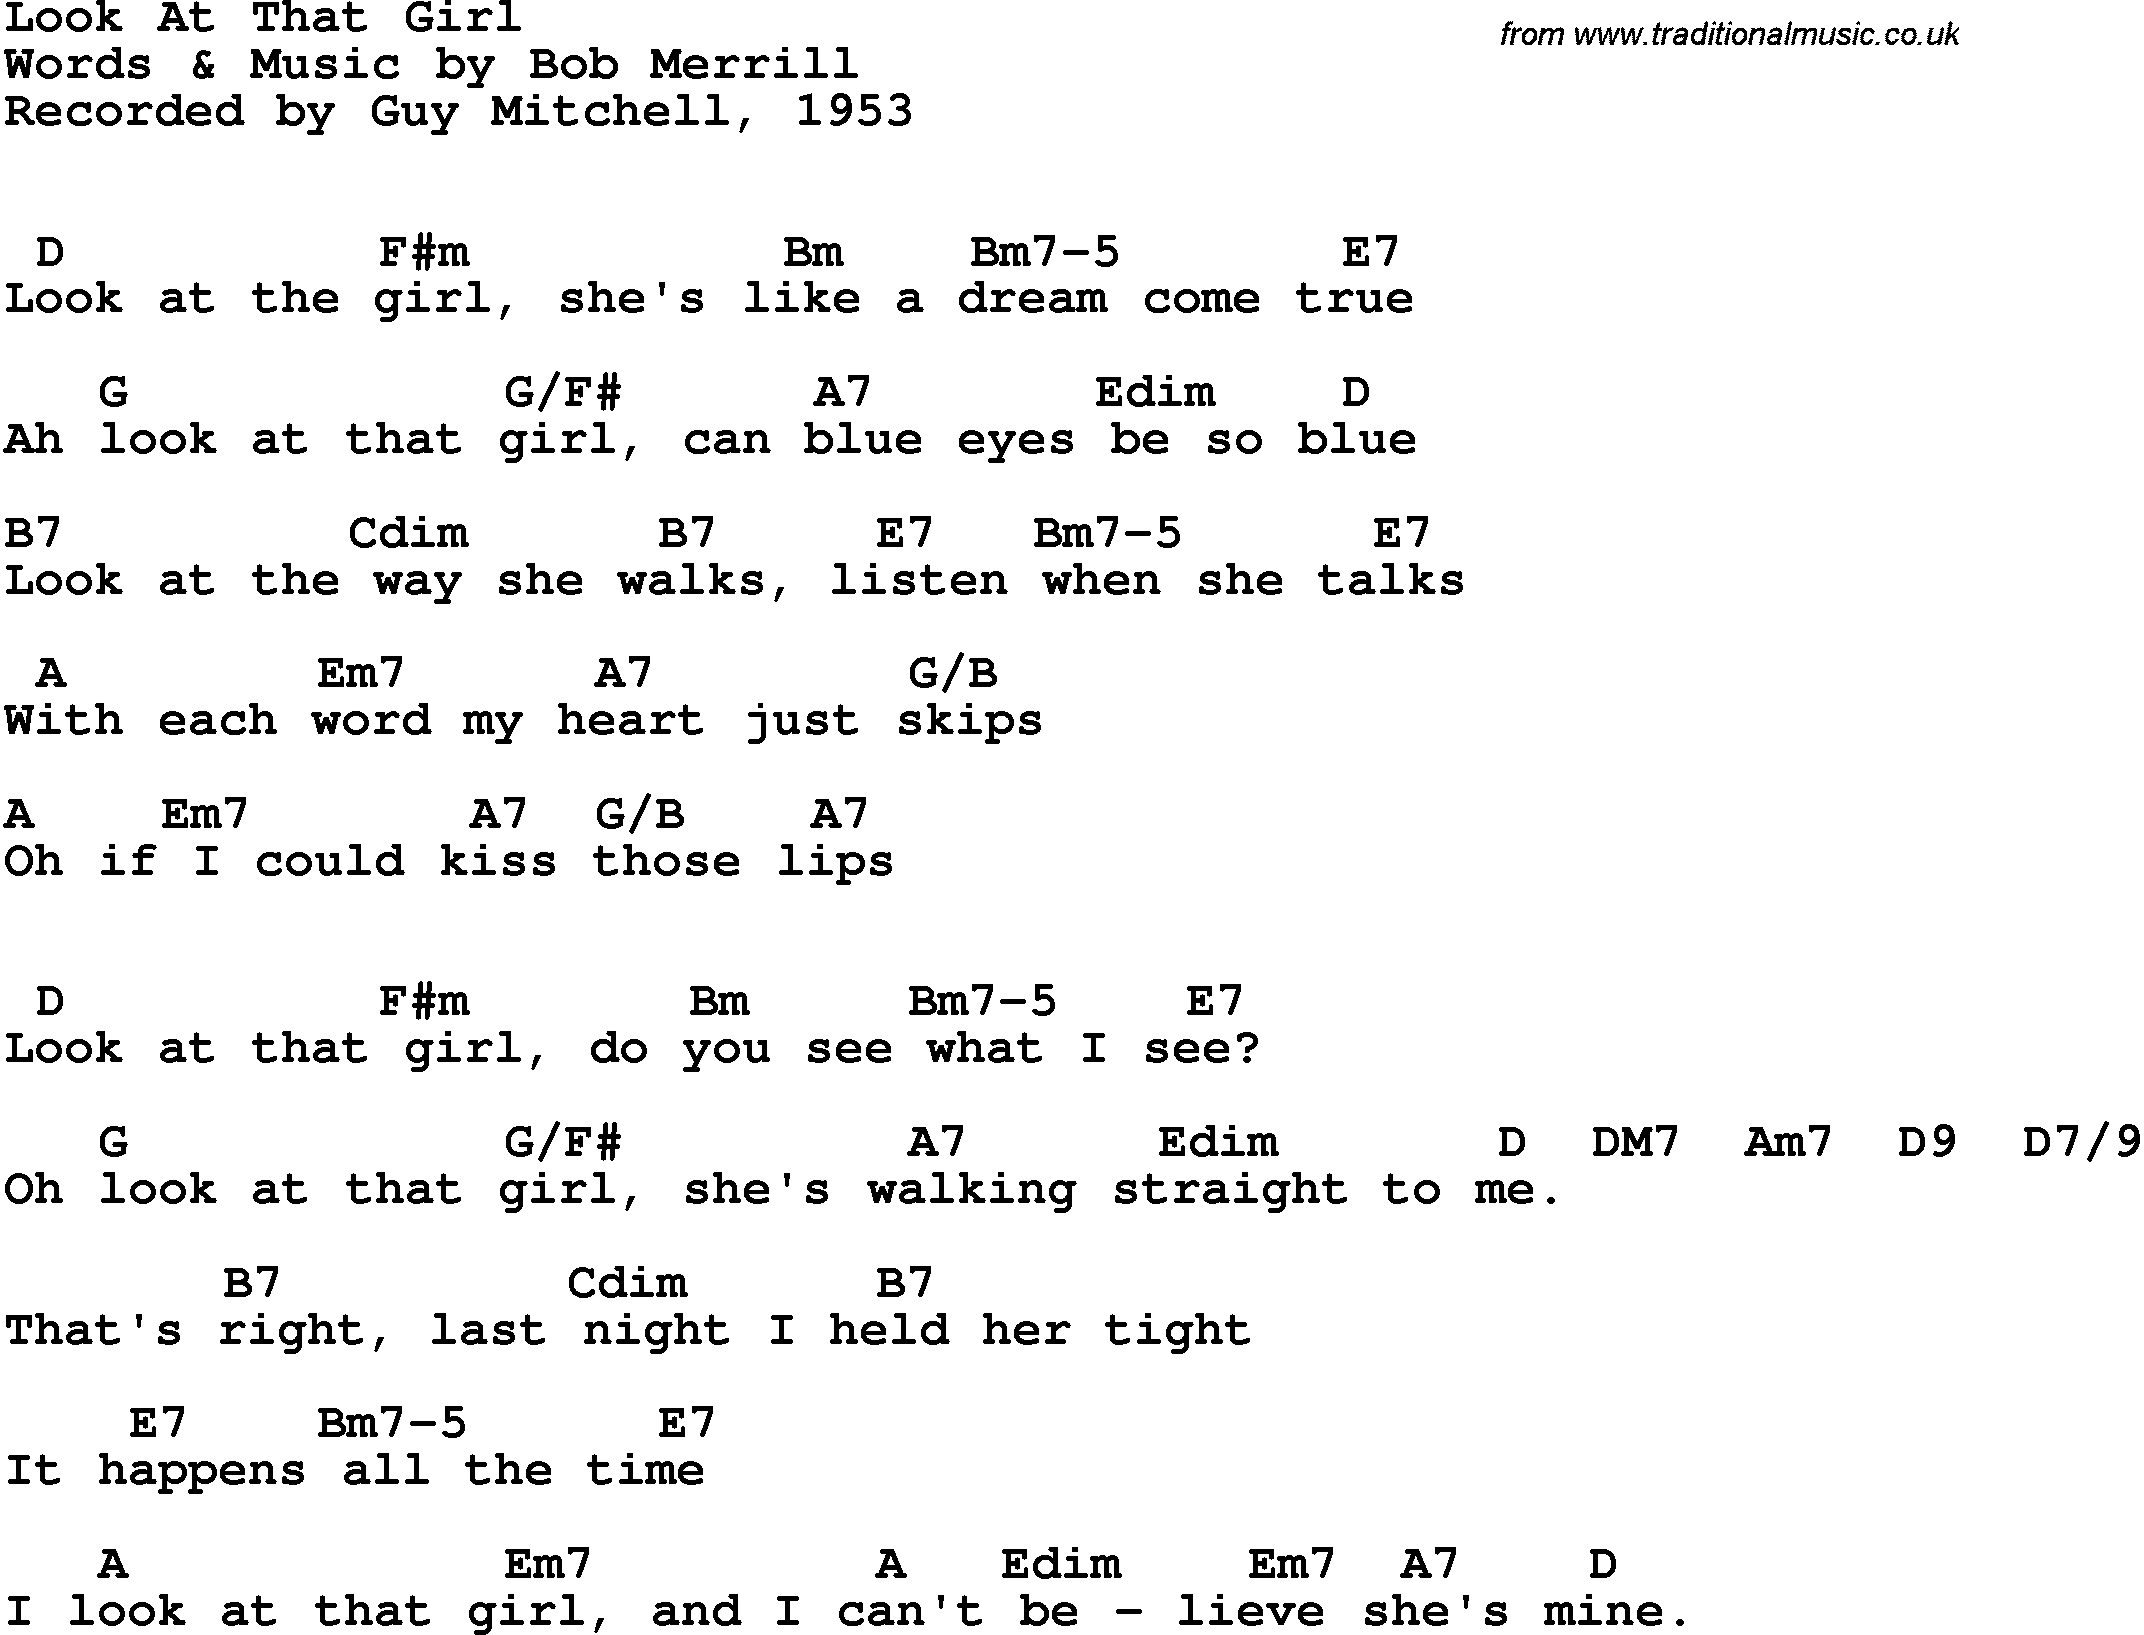 Song Lyrics with guitar chords for Look At That Girl- Guy Mitchell, 1953